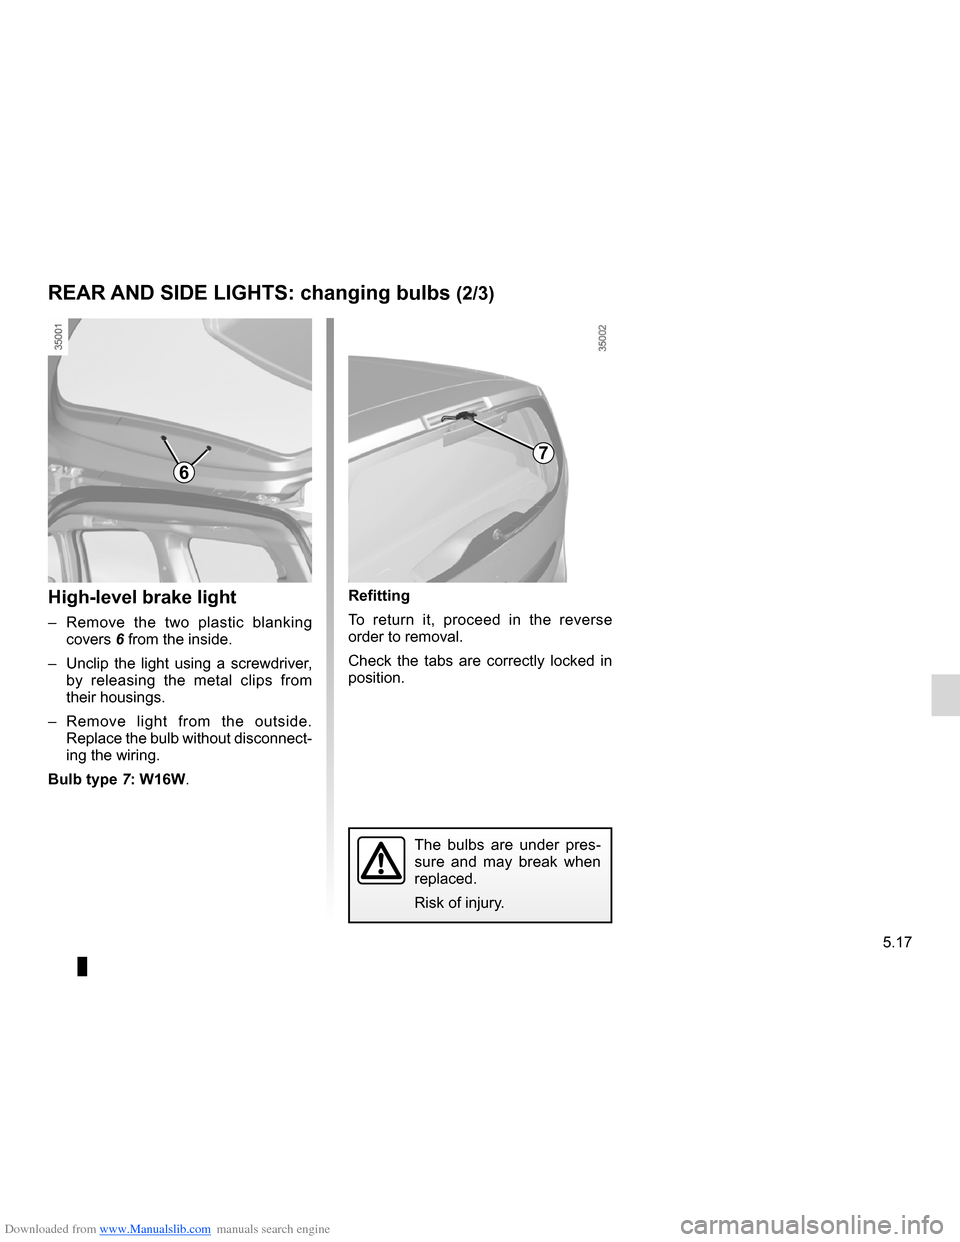 DACIA LODGY 2012 1.G Owners Manual Downloaded from www.Manualslib.com manuals search engine lights:brake lights  ...................................................... (current page)
JauneNoirNoir texte
5.17
ENG_UD26662_2
Feux arrière